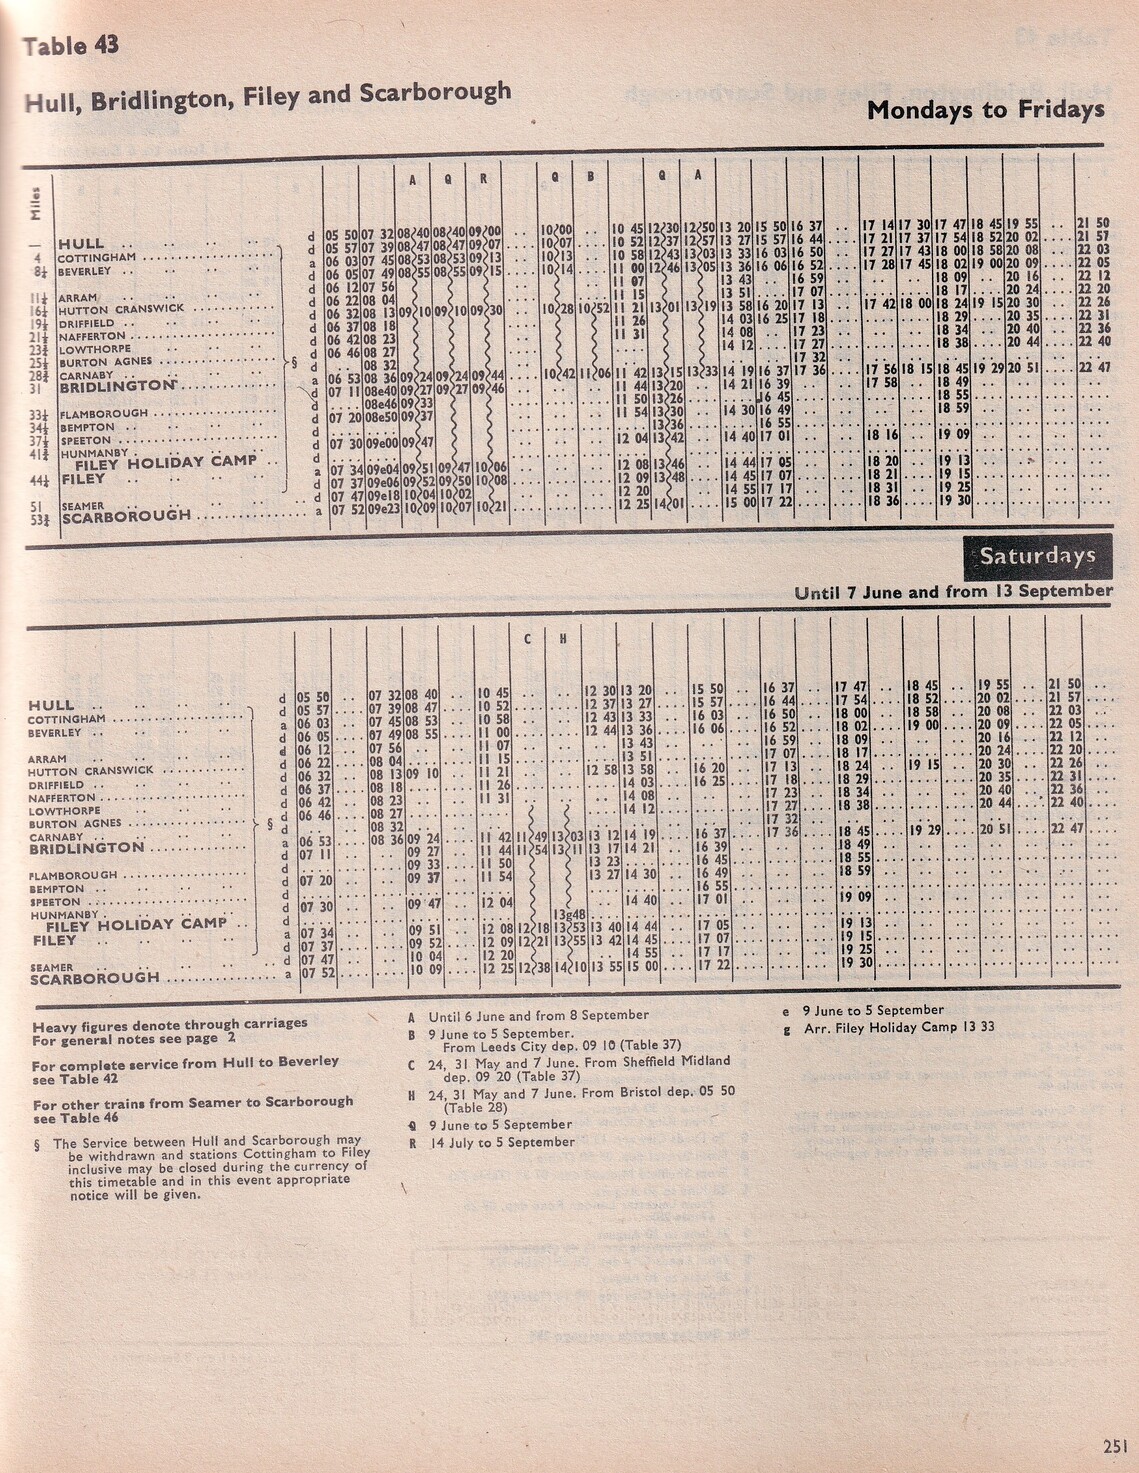 May 1969 to May 1970 Monday to Friday and 'Winter' Saturday train service